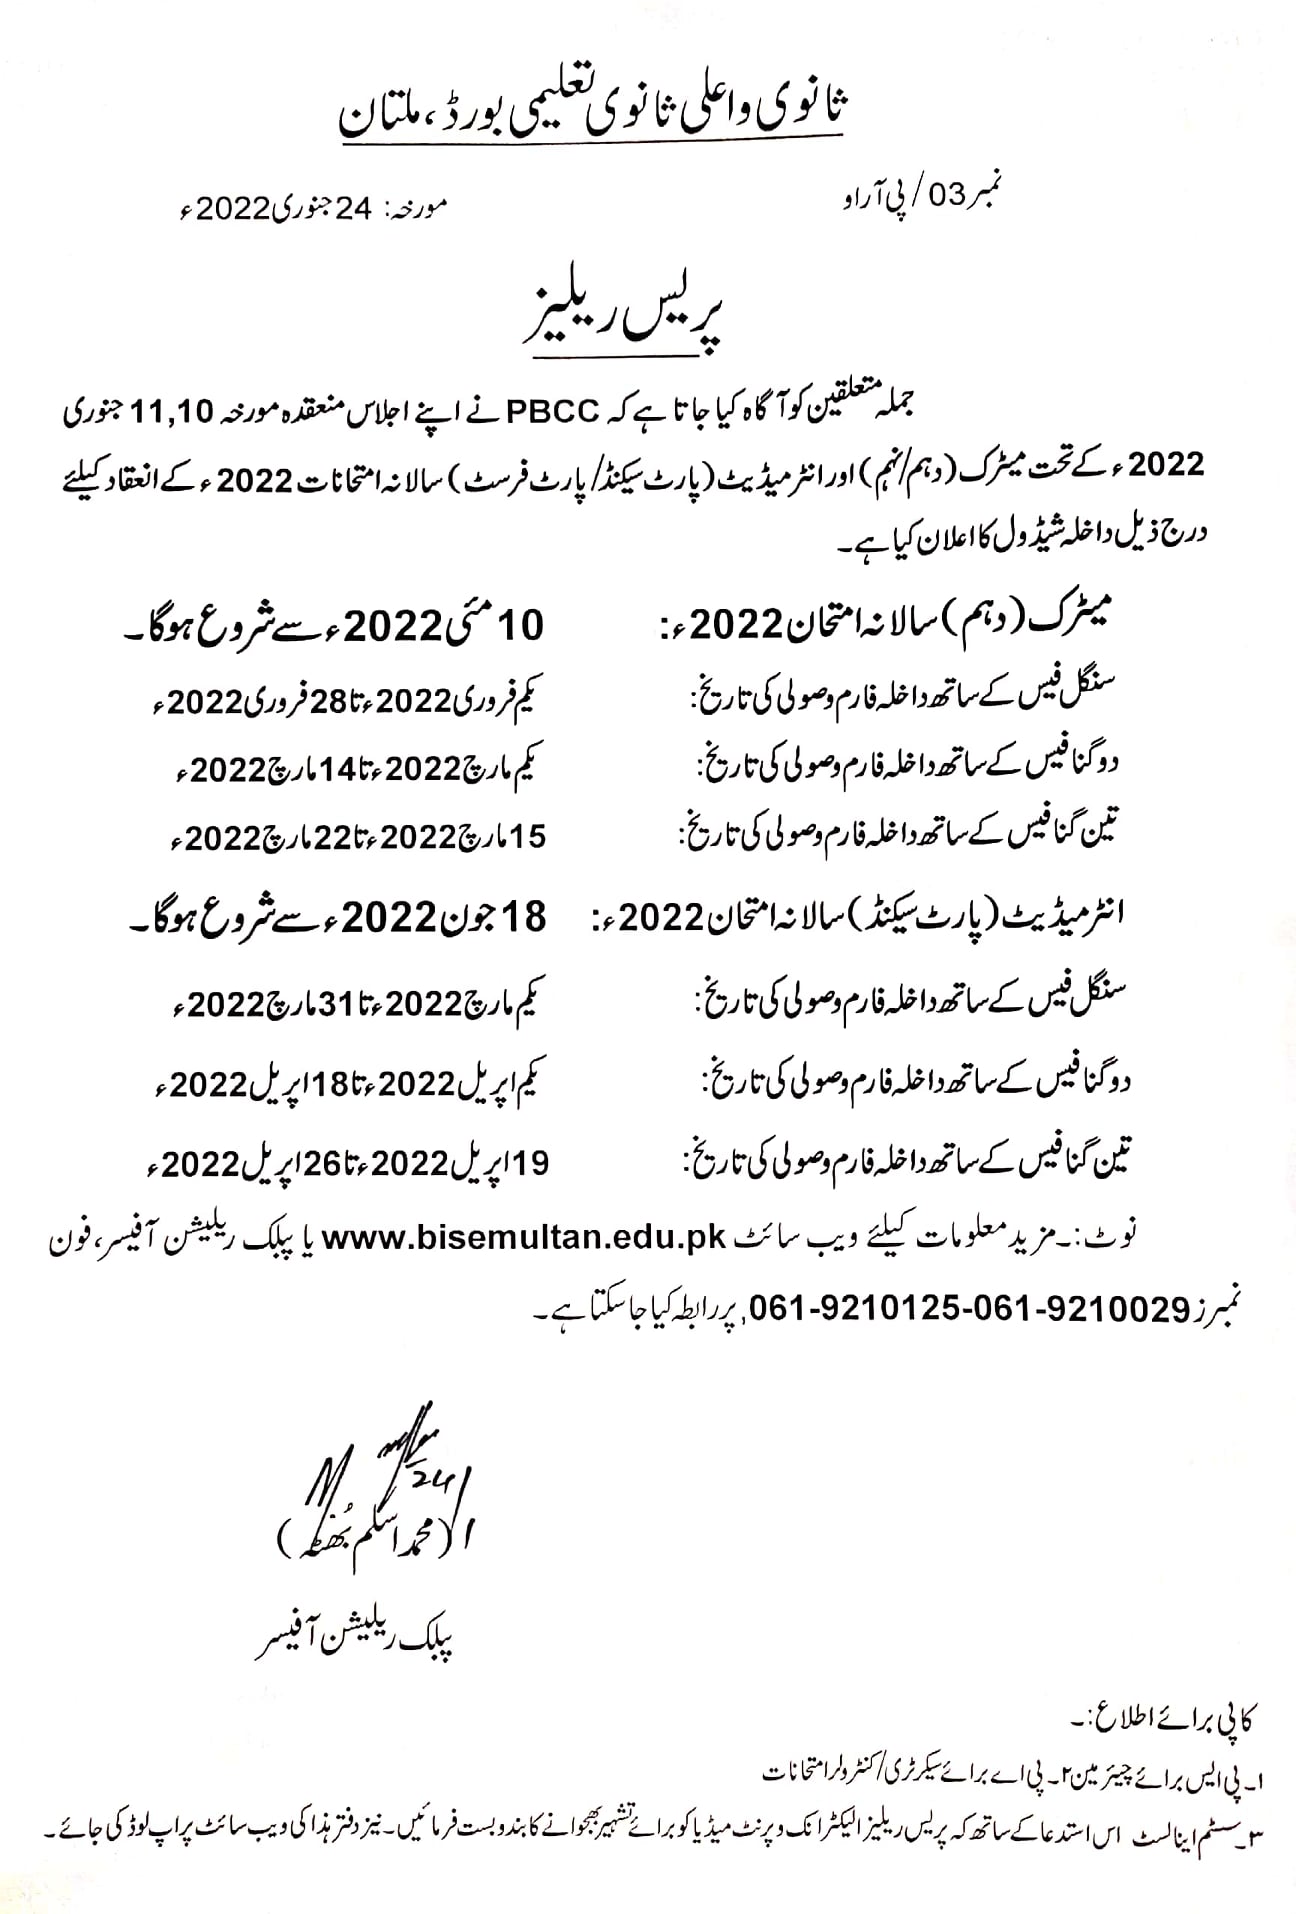 BISE Multan Online Admission Forms, Fee, 2022 Exams Schedule Matric, 9th Class, Inter